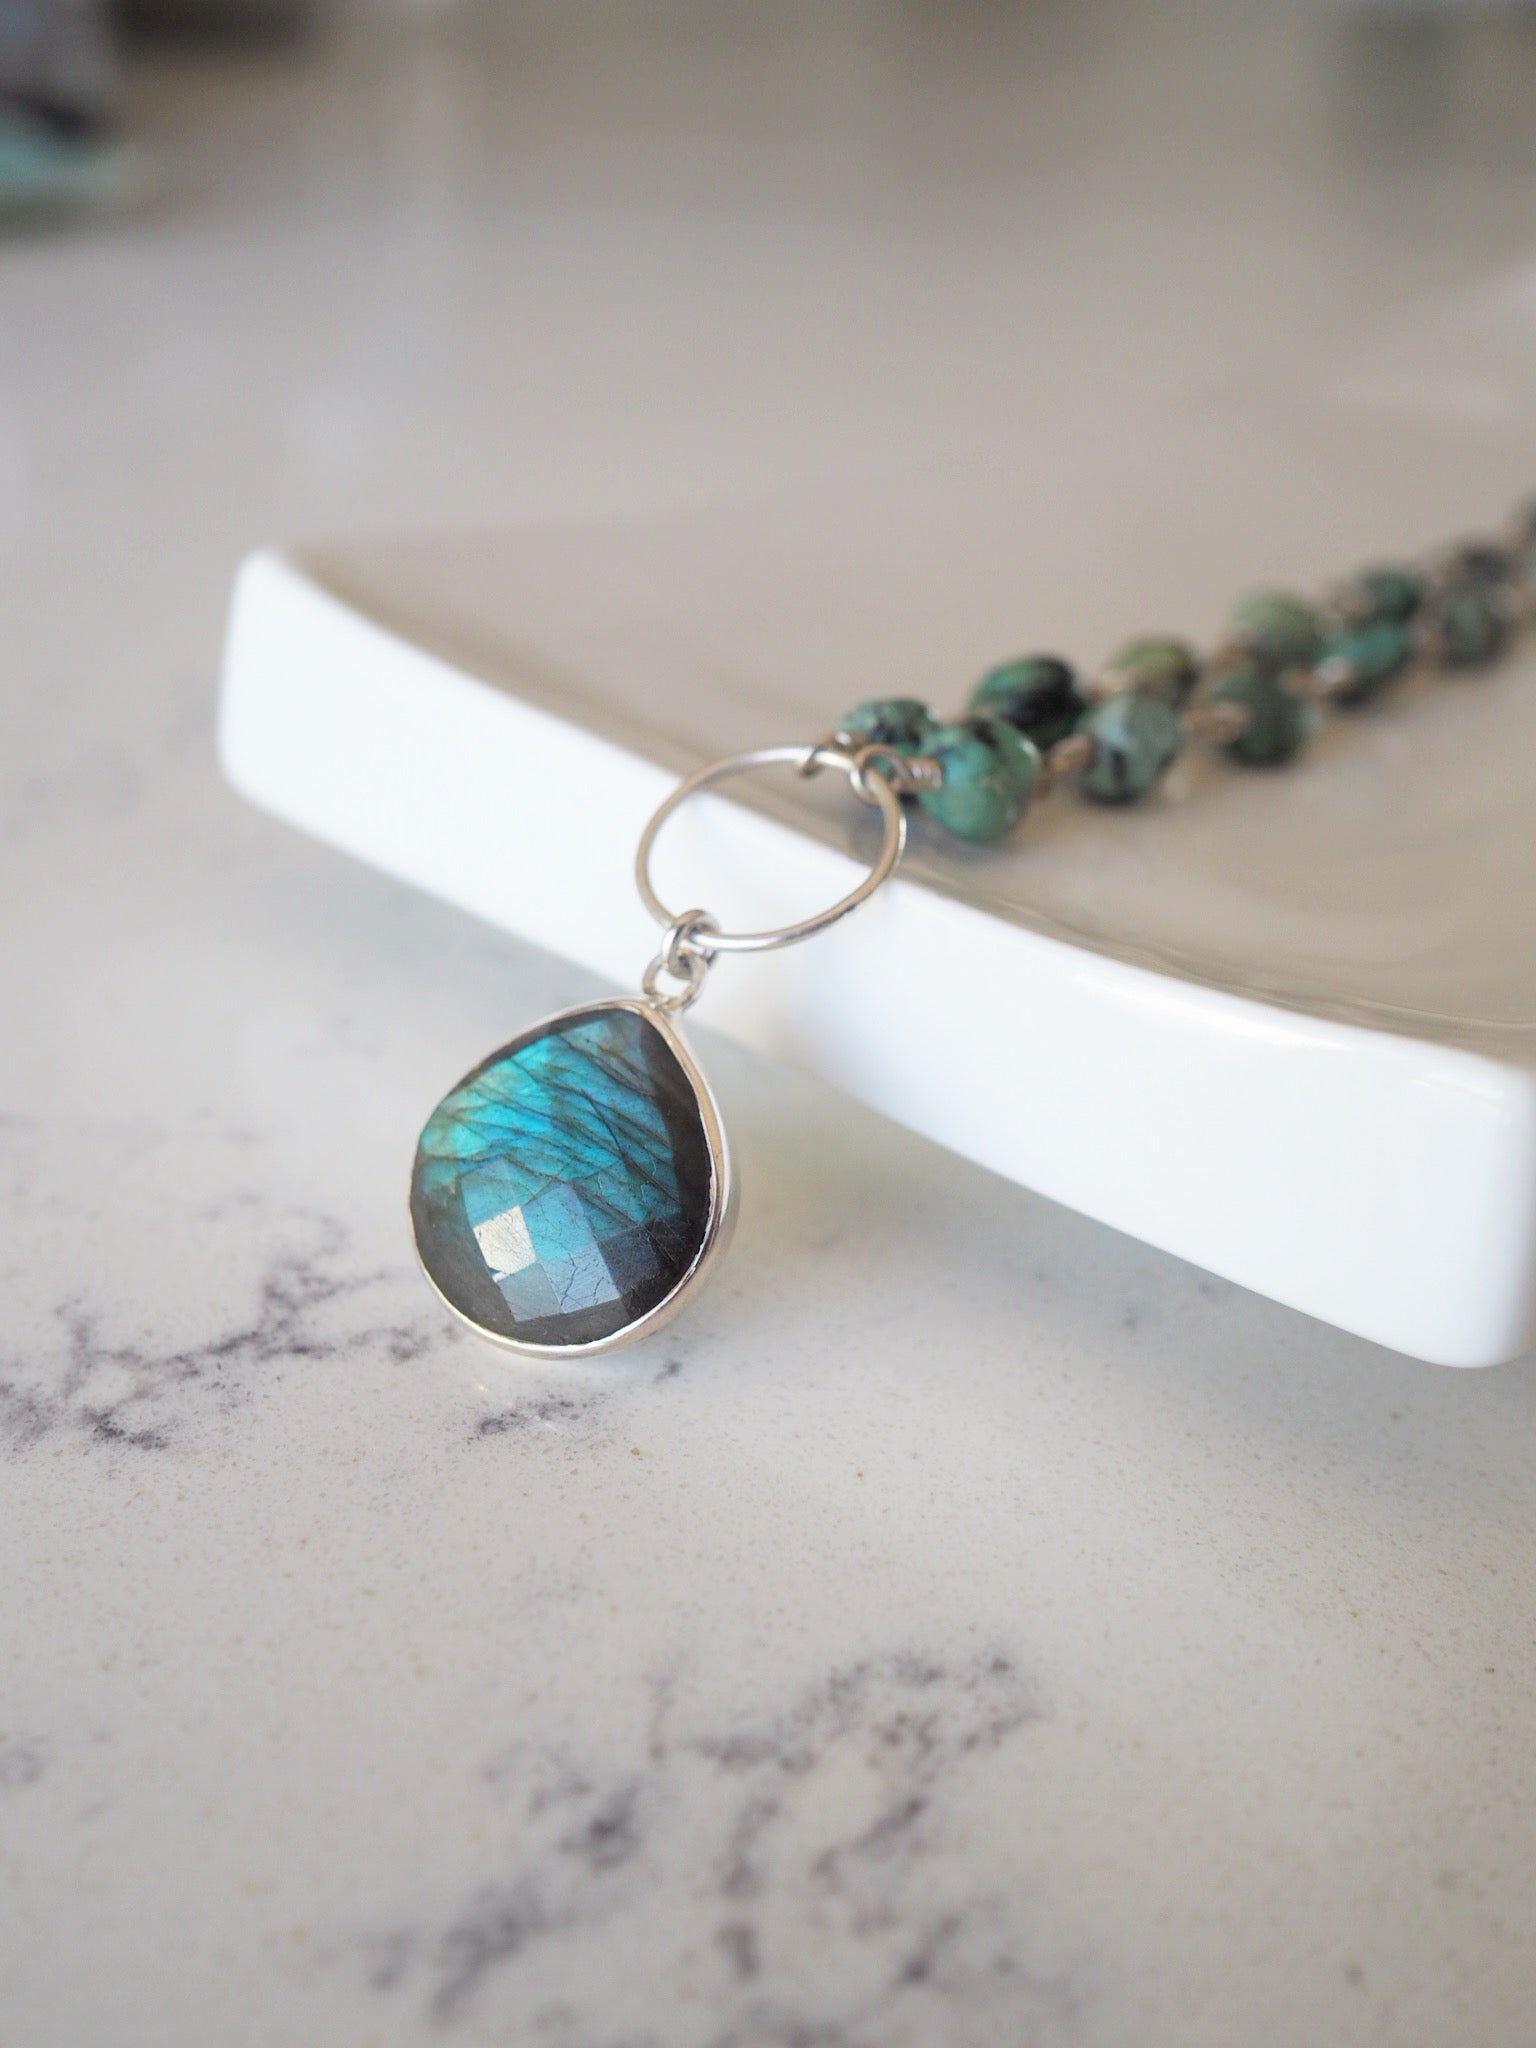 Labradorite and Turquoise Gemstone Necklace by Wallis Designs